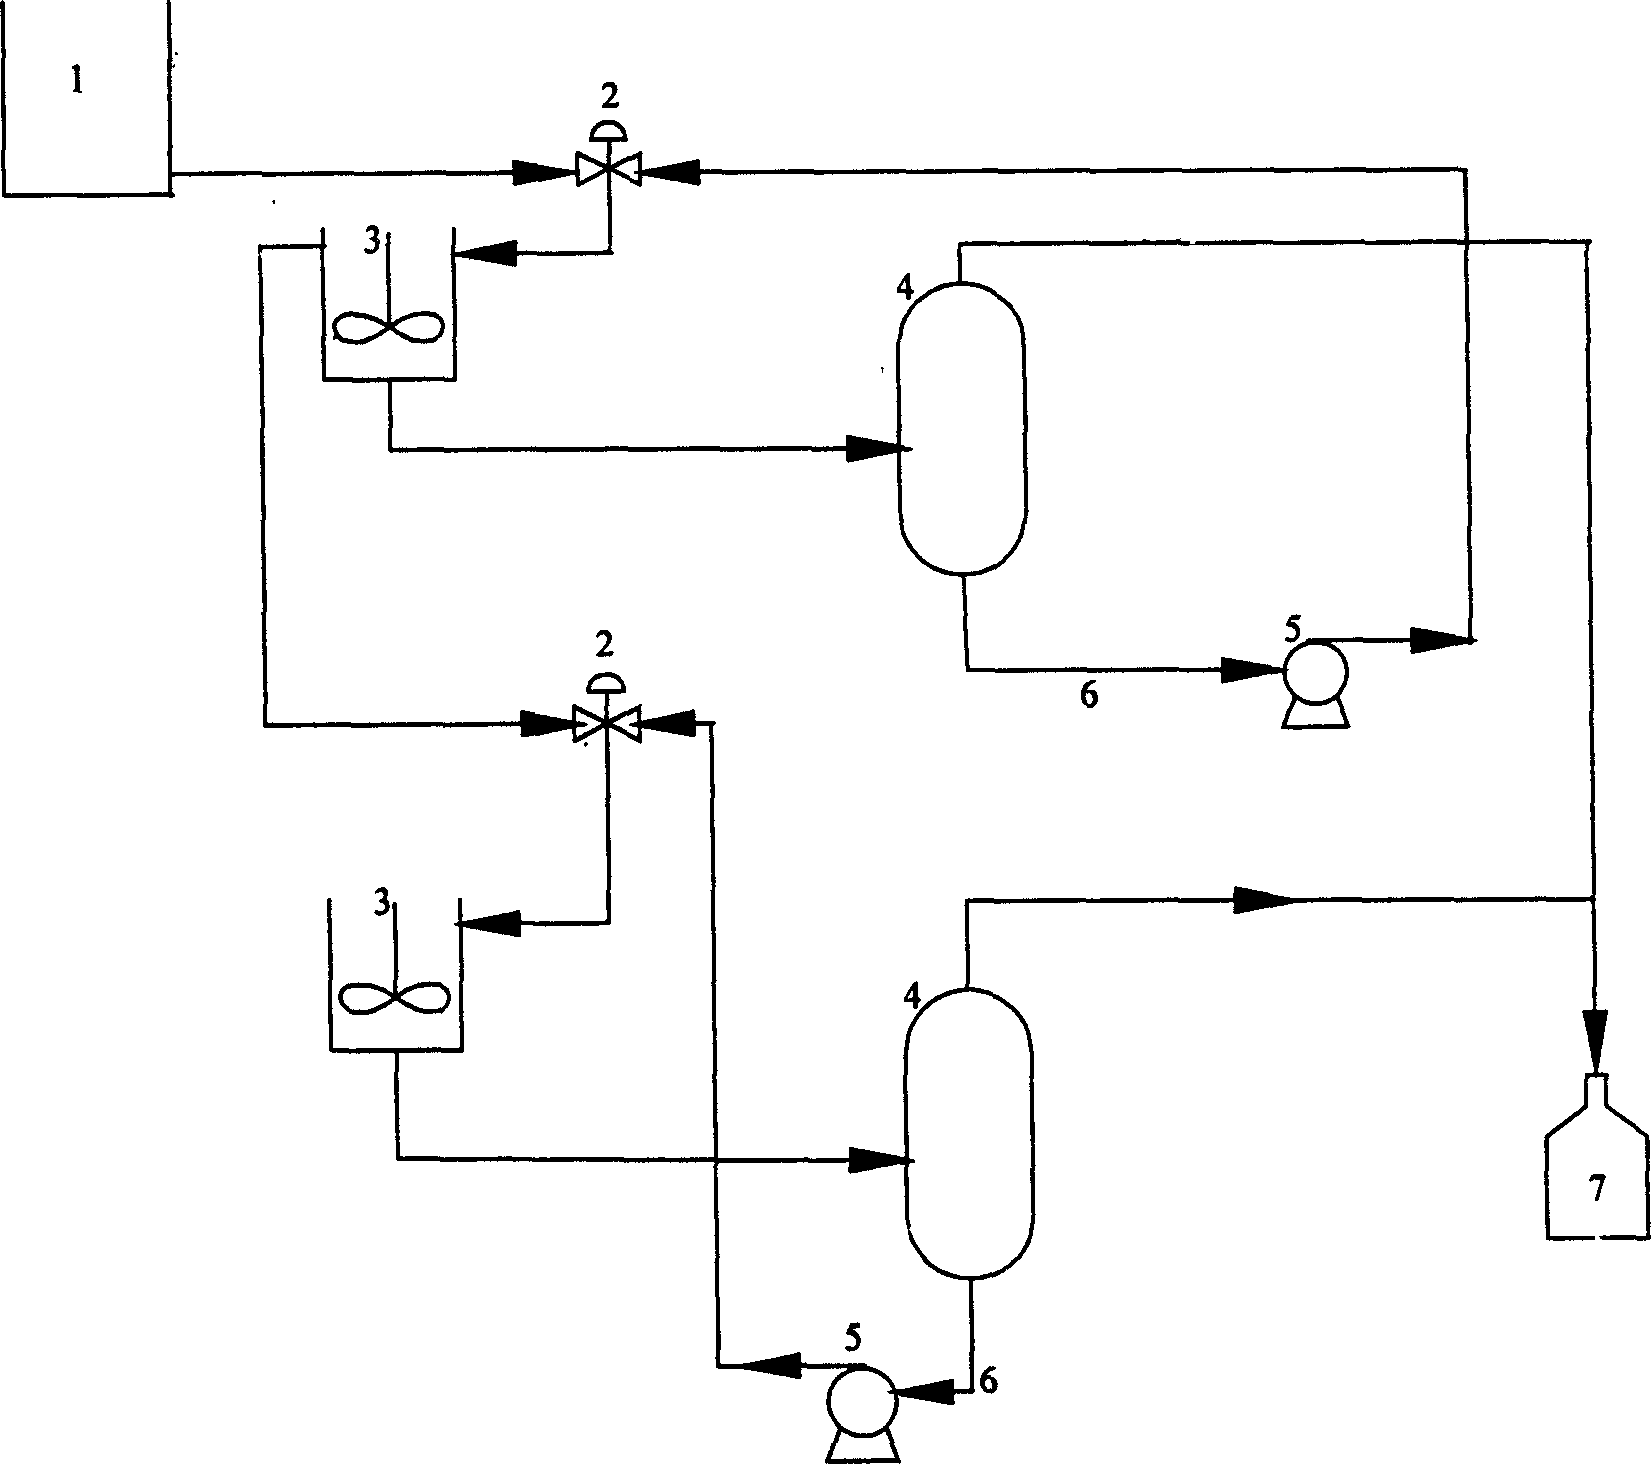 Process for separating and recovering minim organic solvent from waste water using ion liquid